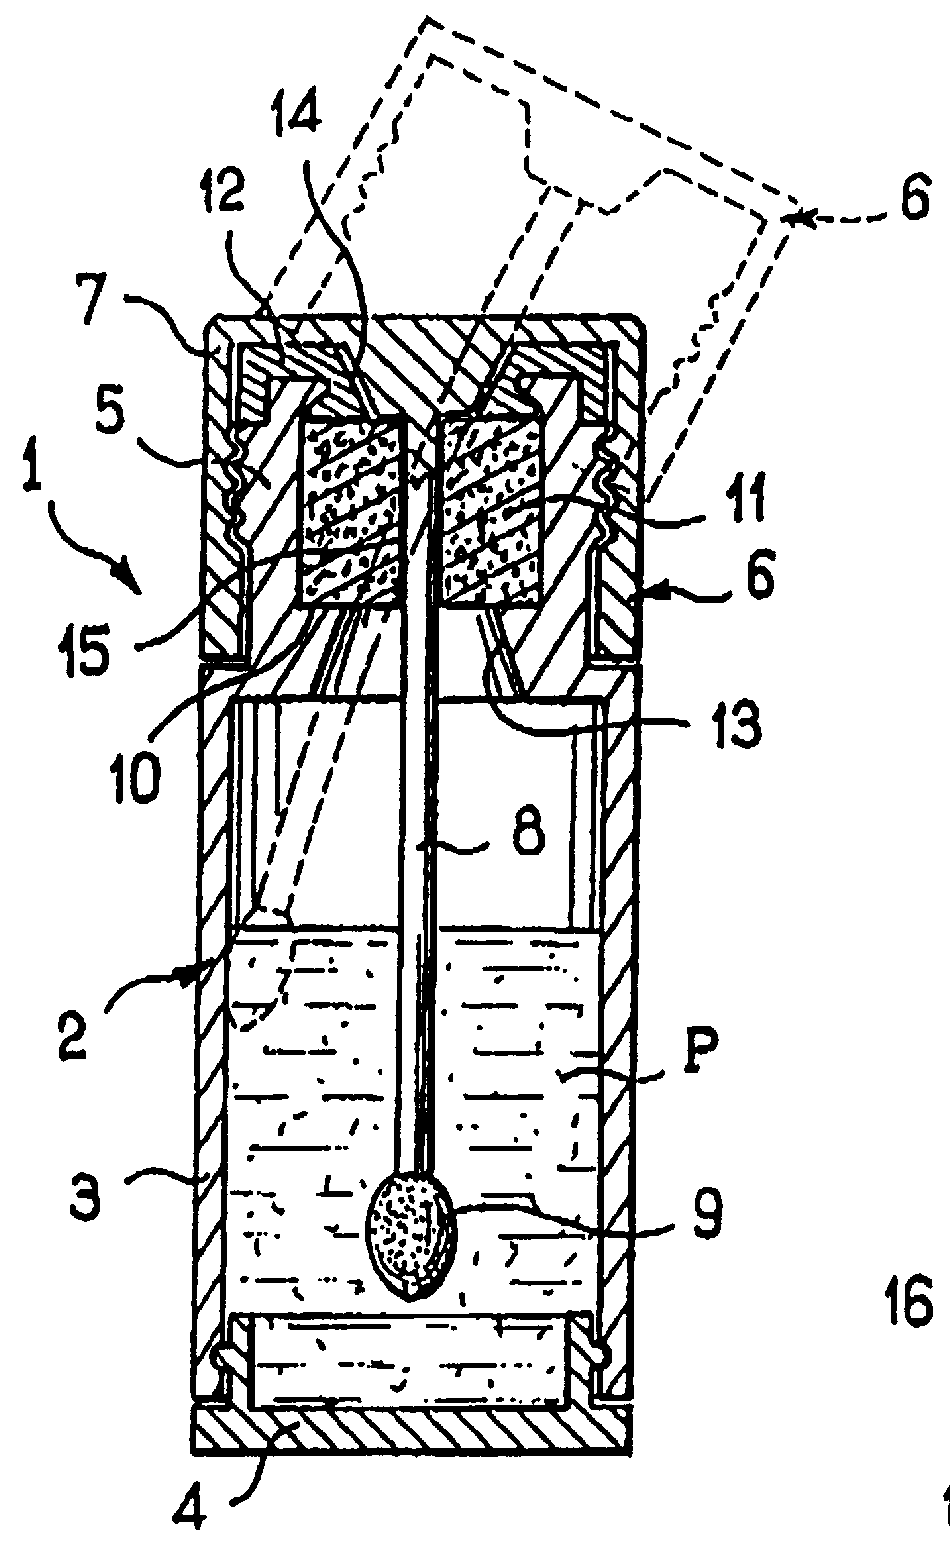 Packaging and applicator device, and a refill element for such a device